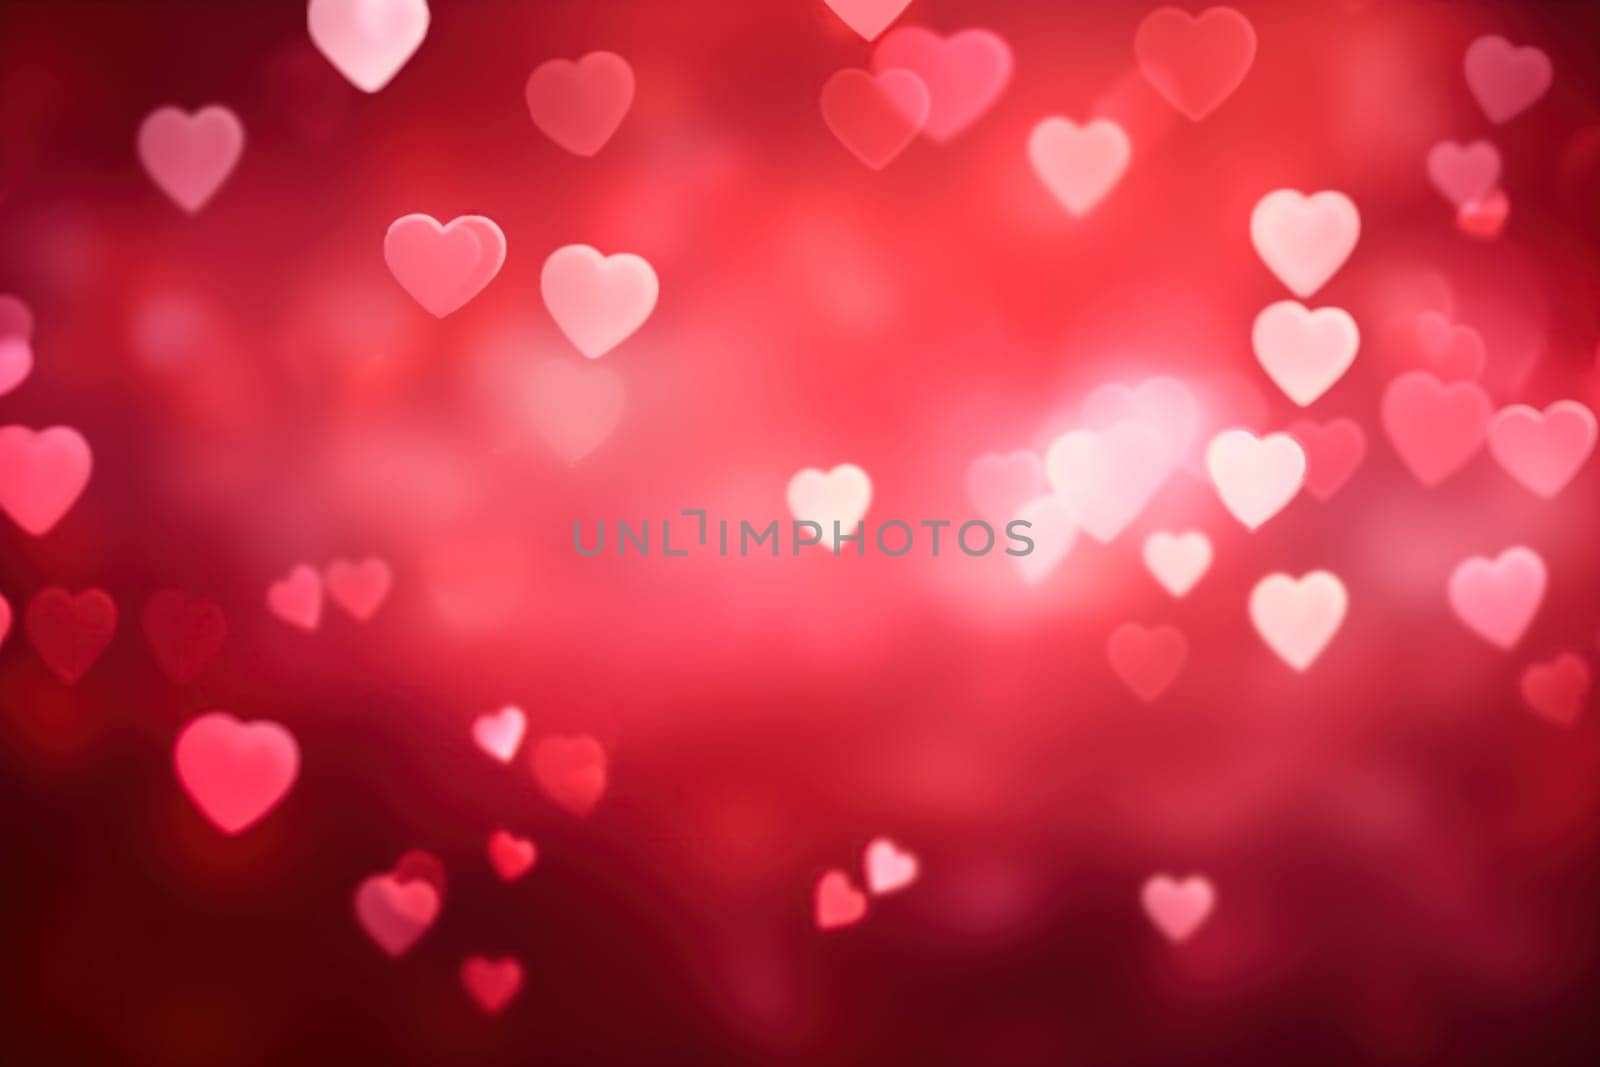 A romantic and dreamy background featuring heart-shaped bokeh lights, perfect for Valentine’s Day or love-themed designs